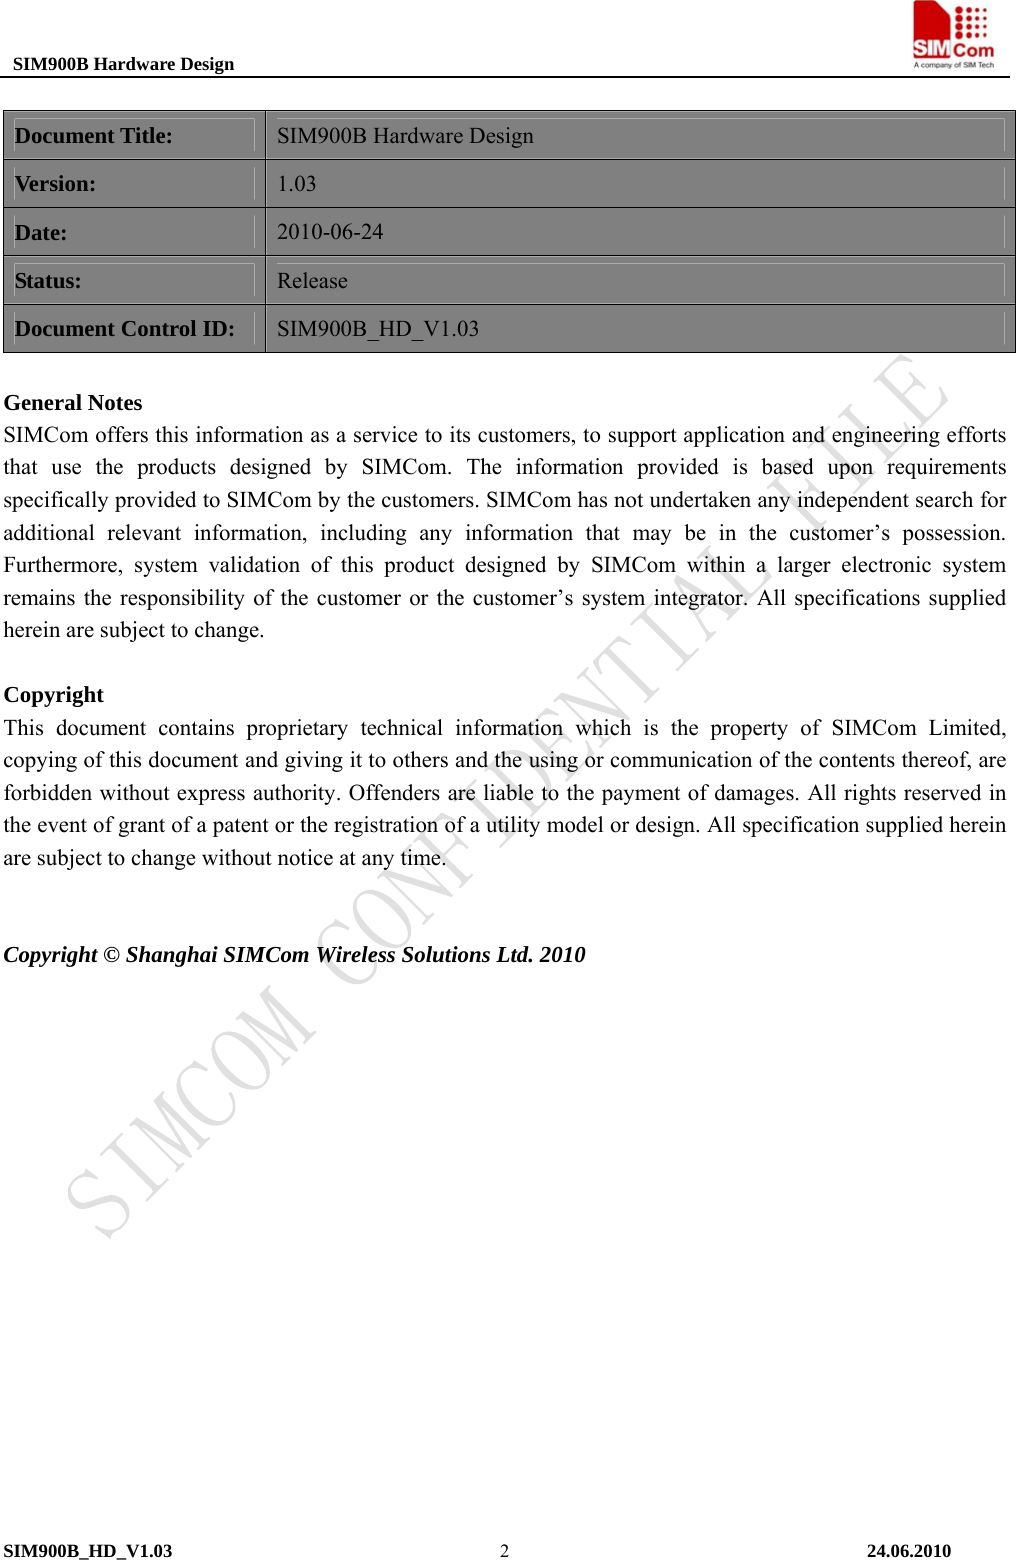  SIM900B Hardware Design                                                                           Document Title: SIM900B Hardware Design Version: 1.03 Date: 2010-06-24 Status: Release Document Control ID: SIM900B_HD_V1.03  General Notes SIMCom offers this information as a service to its customers, to support application and engineering efforts that use the products designed by SIMCom. The information provided is based upon requirements specifically provided to SIMCom by the customers. SIMCom has not undertaken any independent search for additional relevant information, including any information that may be in the customer’s possession. Furthermore, system validation of this product designed by SIMCom within a larger electronic system remains the responsibility of the customer or the customer’s system integrator. All specifications supplied herein are subject to change.      Copyright This document contains proprietary technical information which is the property of SIMCom Limited, copying of this document and giving it to others and the using or communication of the contents thereof, are forbidden without express authority. Offenders are liable to the payment of damages. All rights reserved in the event of grant of a patent or the registration of a utility model or design. All specification supplied herein are subject to change without notice at any time.    Copyright © Shanghai SIMCom Wireless Solutions Ltd. 2010 SIM900B_HD_V1.03                                                                          24.06.2010  2